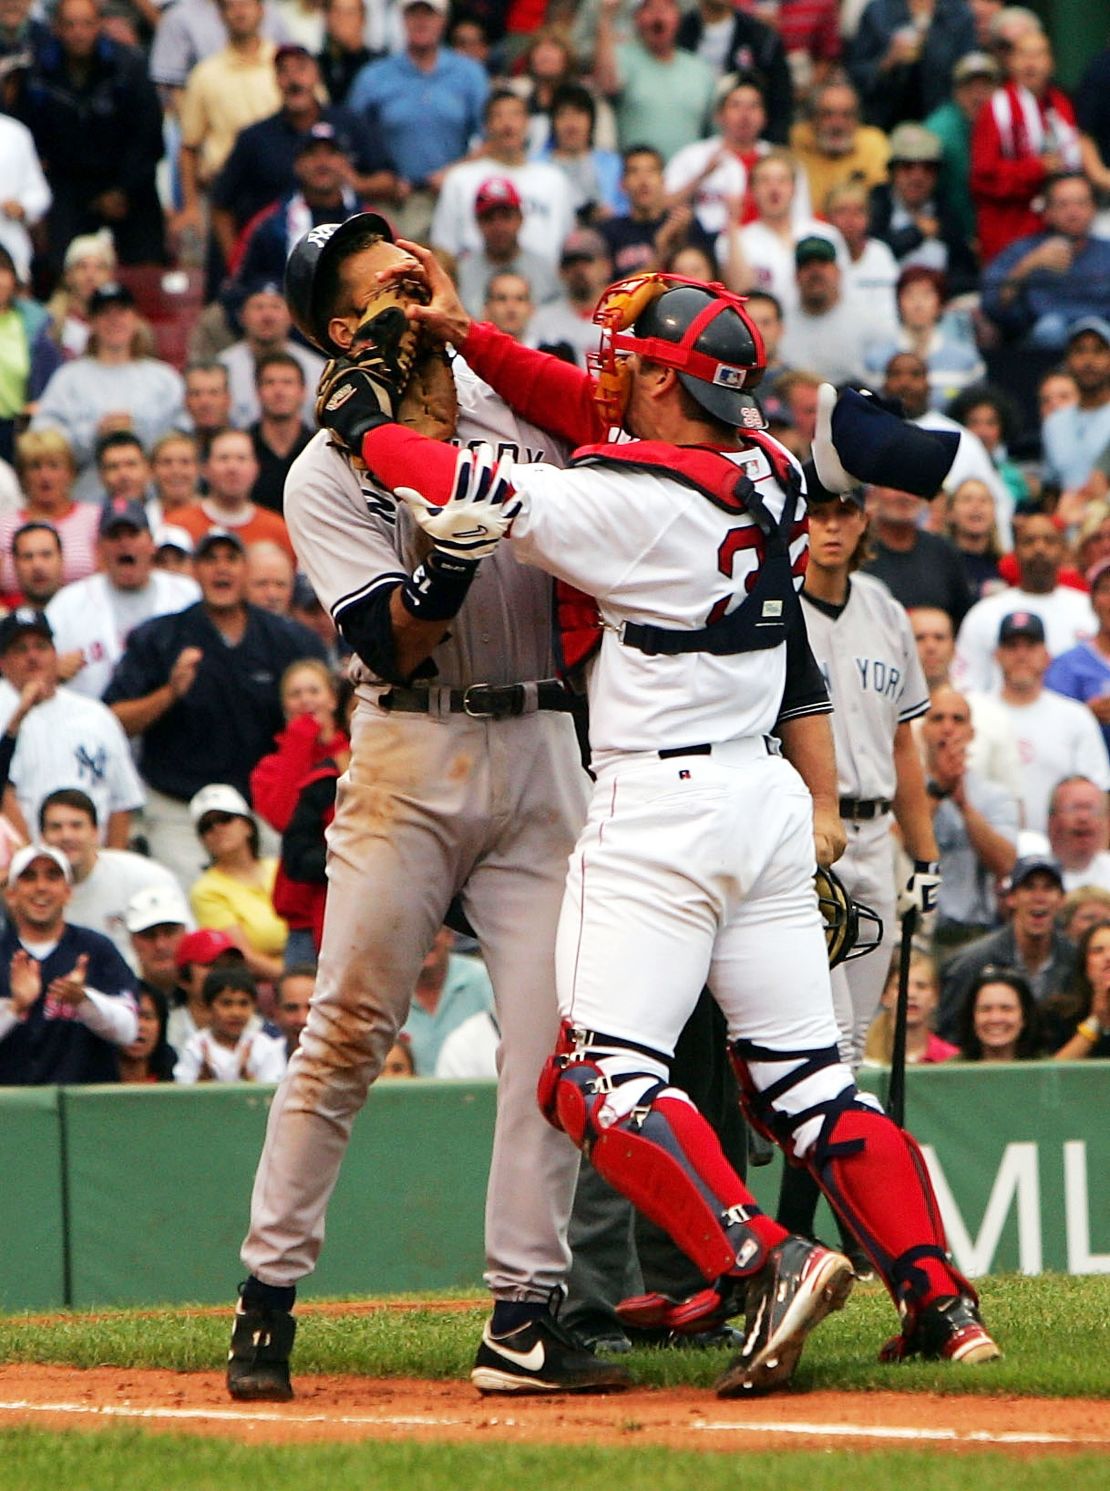 Images of the 2004 dust-up between Rodriguez (L) and Boston's Jason Varitek have been enshrined on the walls of Boston sports bars ever since. 